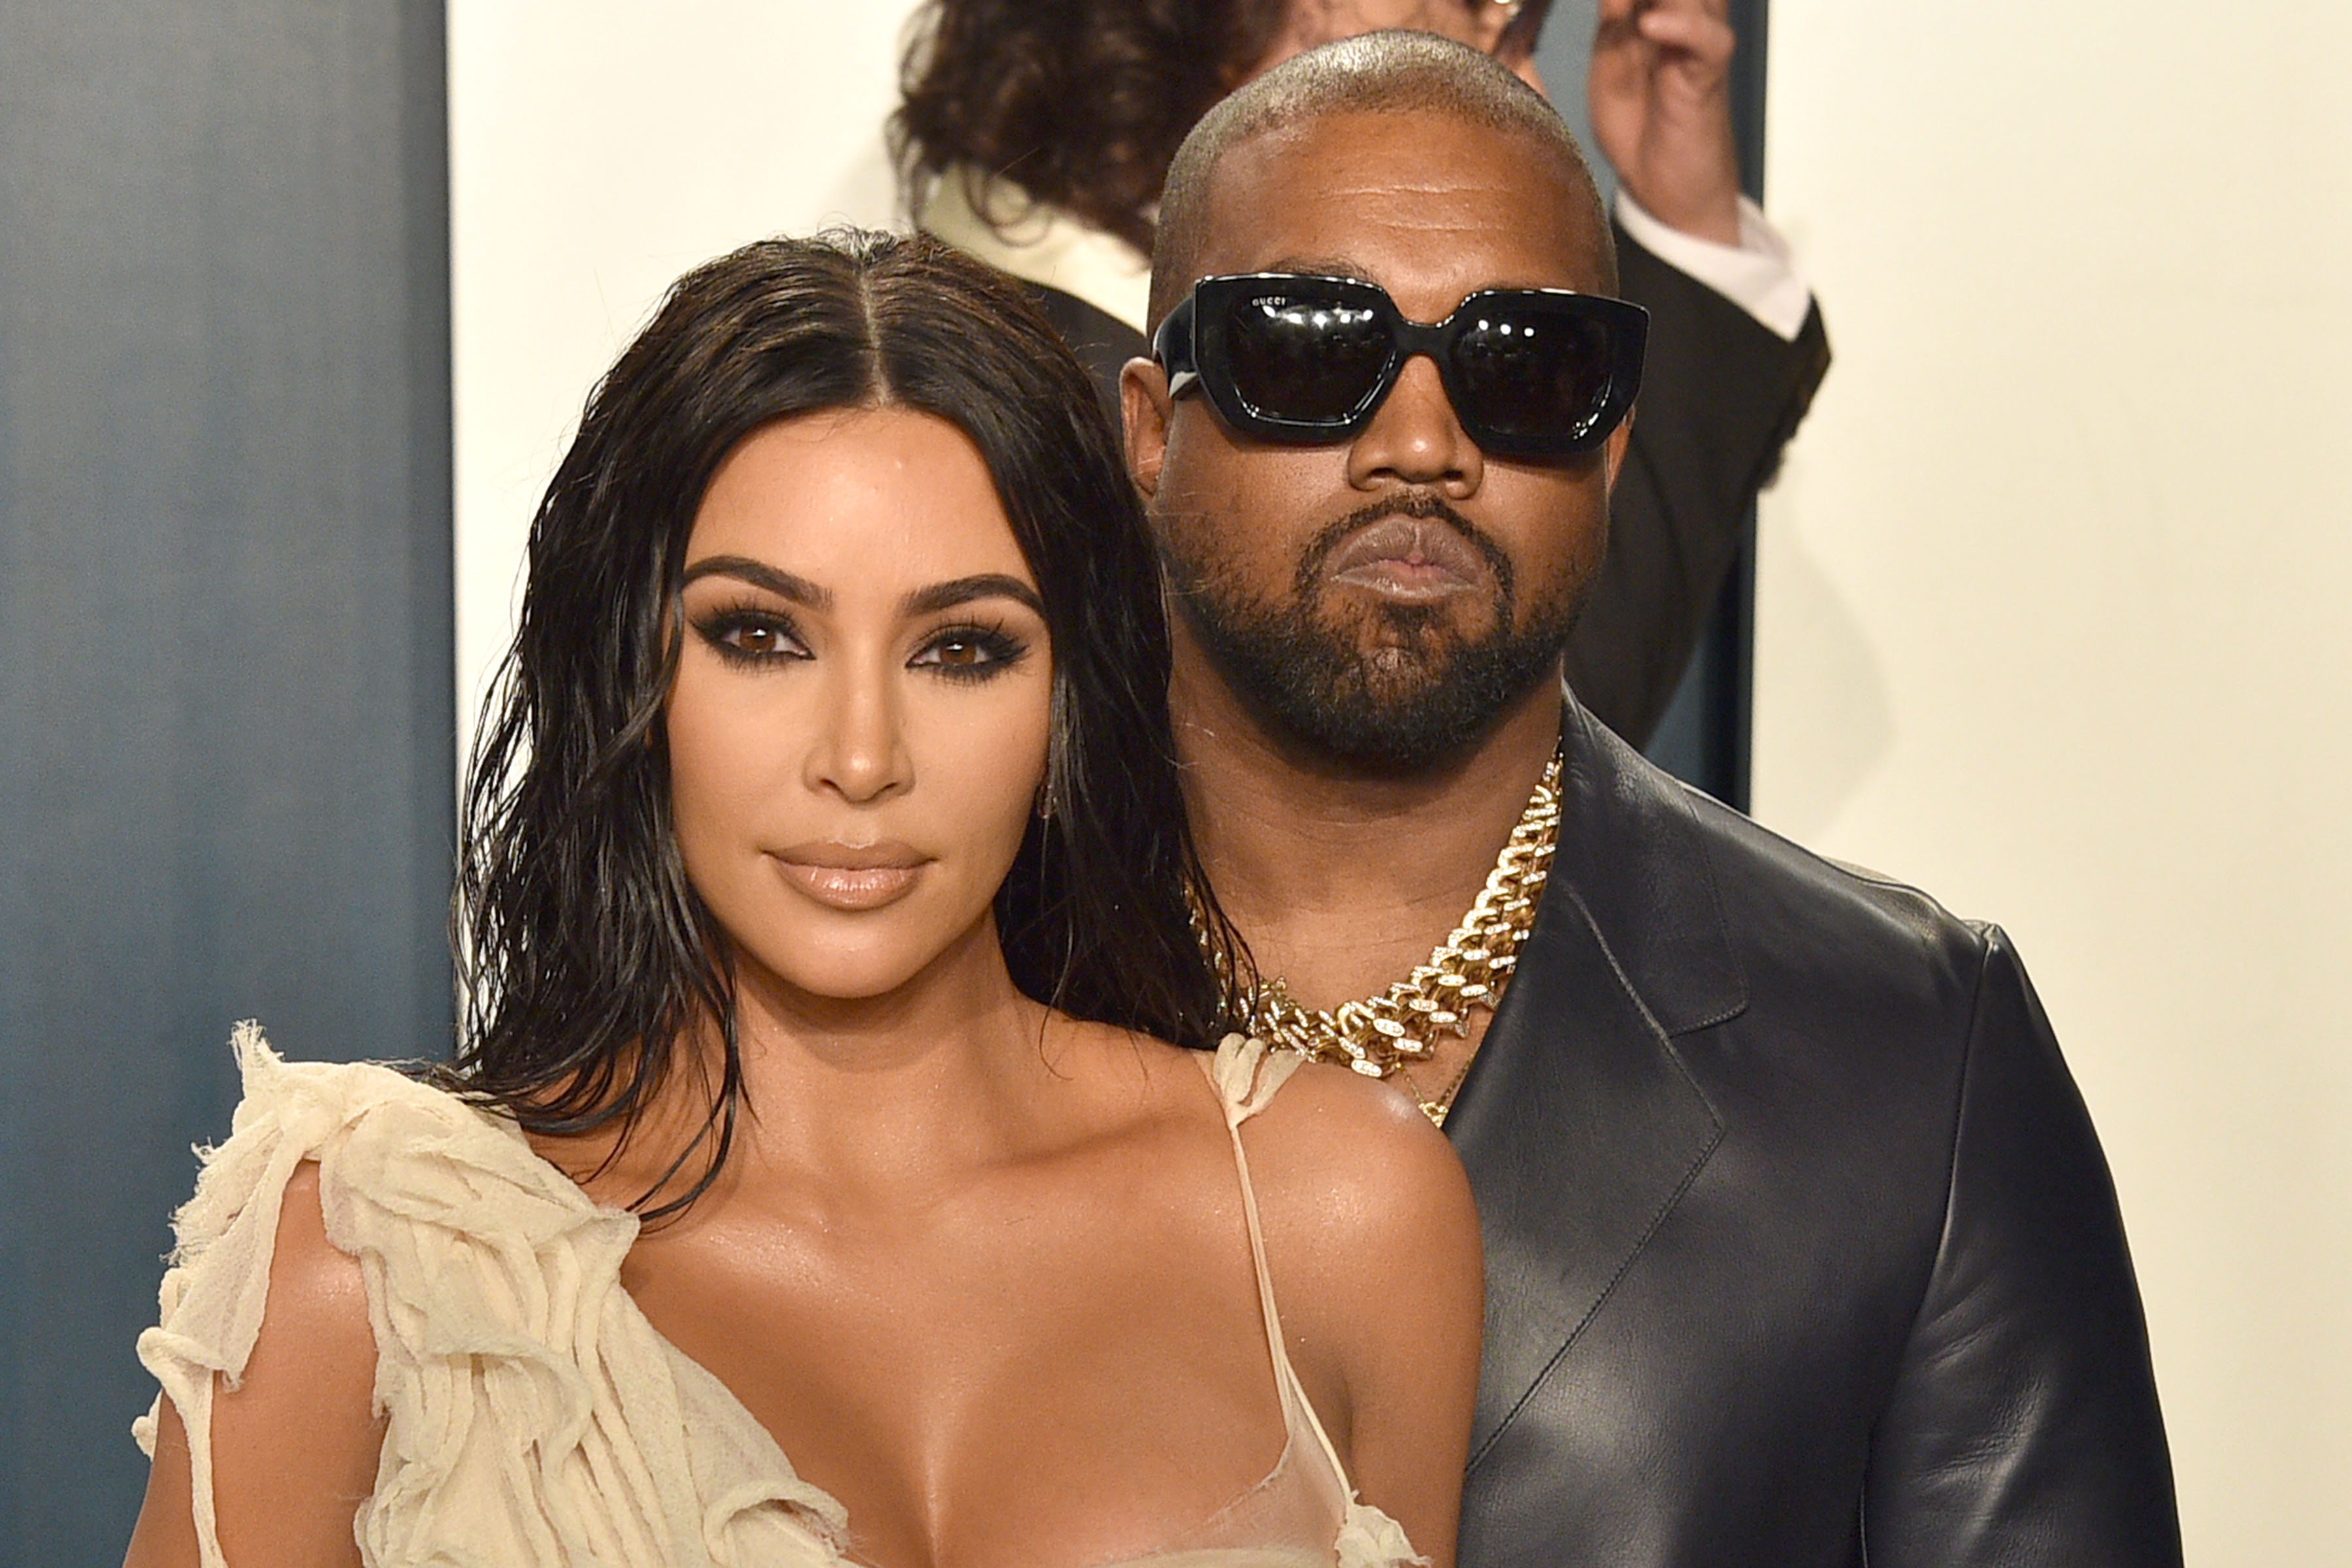 Kim Kardashian and Kanye West attend the 2020 Vanity Fair Oscar Party at Wallis Annenberg Center for the Performing Arts